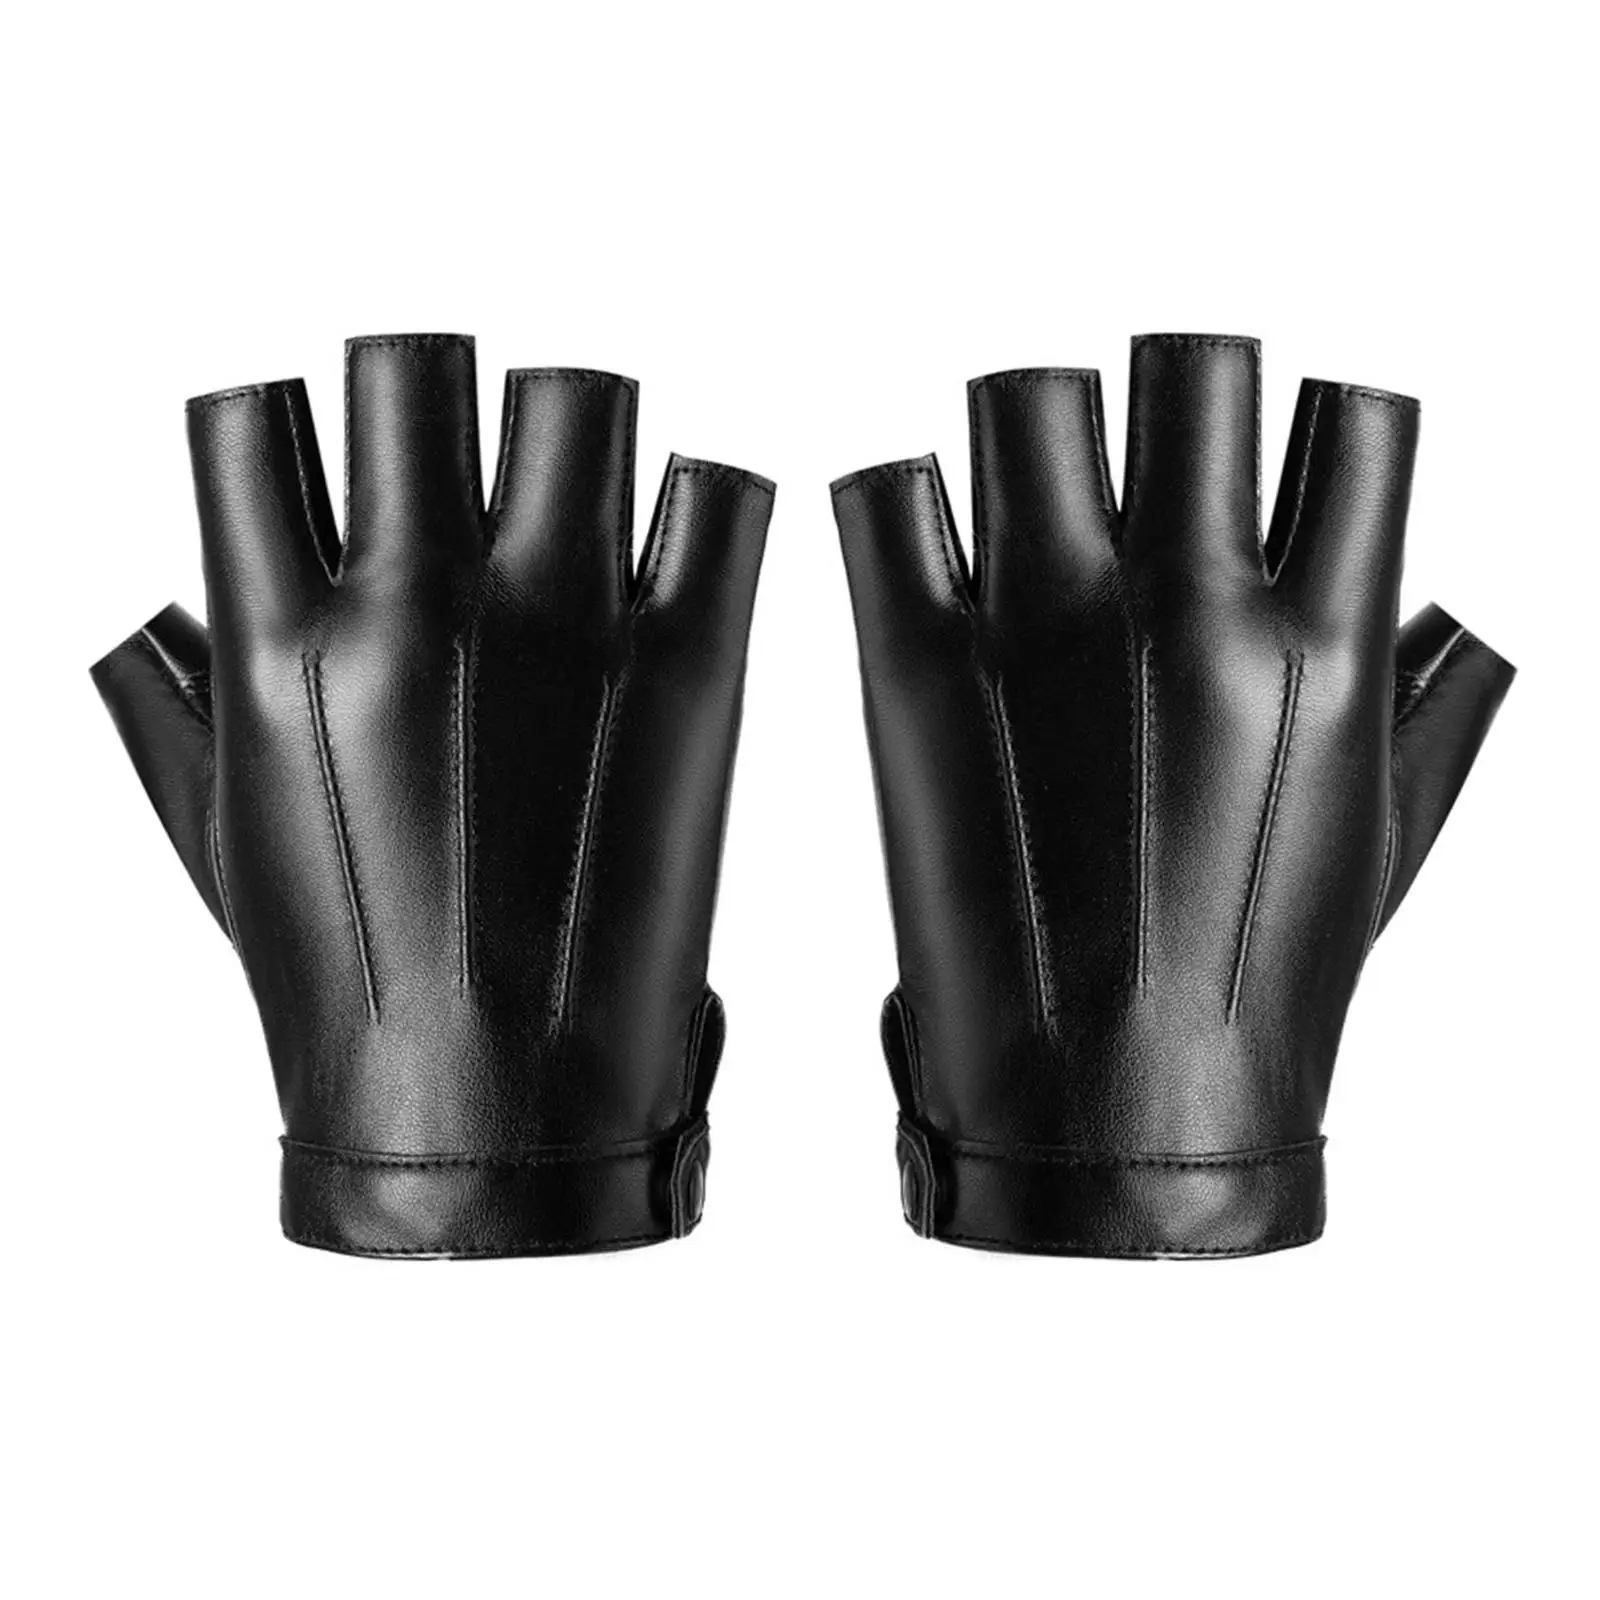 Wear Resistant PU Leather Gloves Mittens Shockproof Breathable Half Finger Gloves for Driving Outdoor Workout Training Cycling